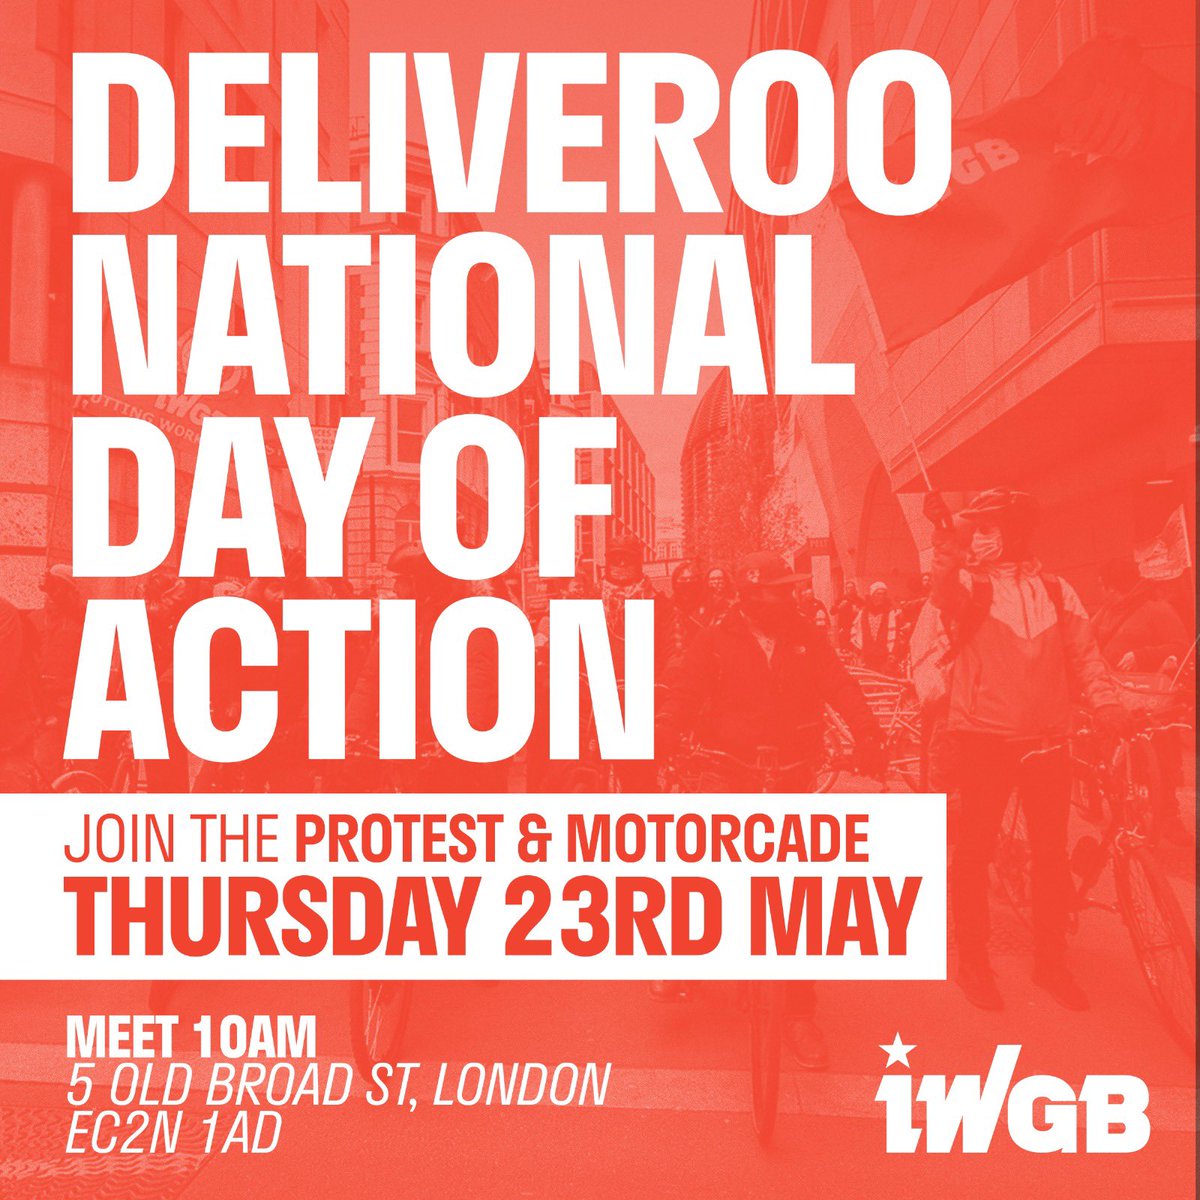 Over the last year Deliveroo paid out over £300 million in dividends whilst slashing workers pay On Thursday the board will convene to celebrate these exploitative conditions that are boosting profits & driving 1000s into working poverty Join us at 10am to spoil their party!